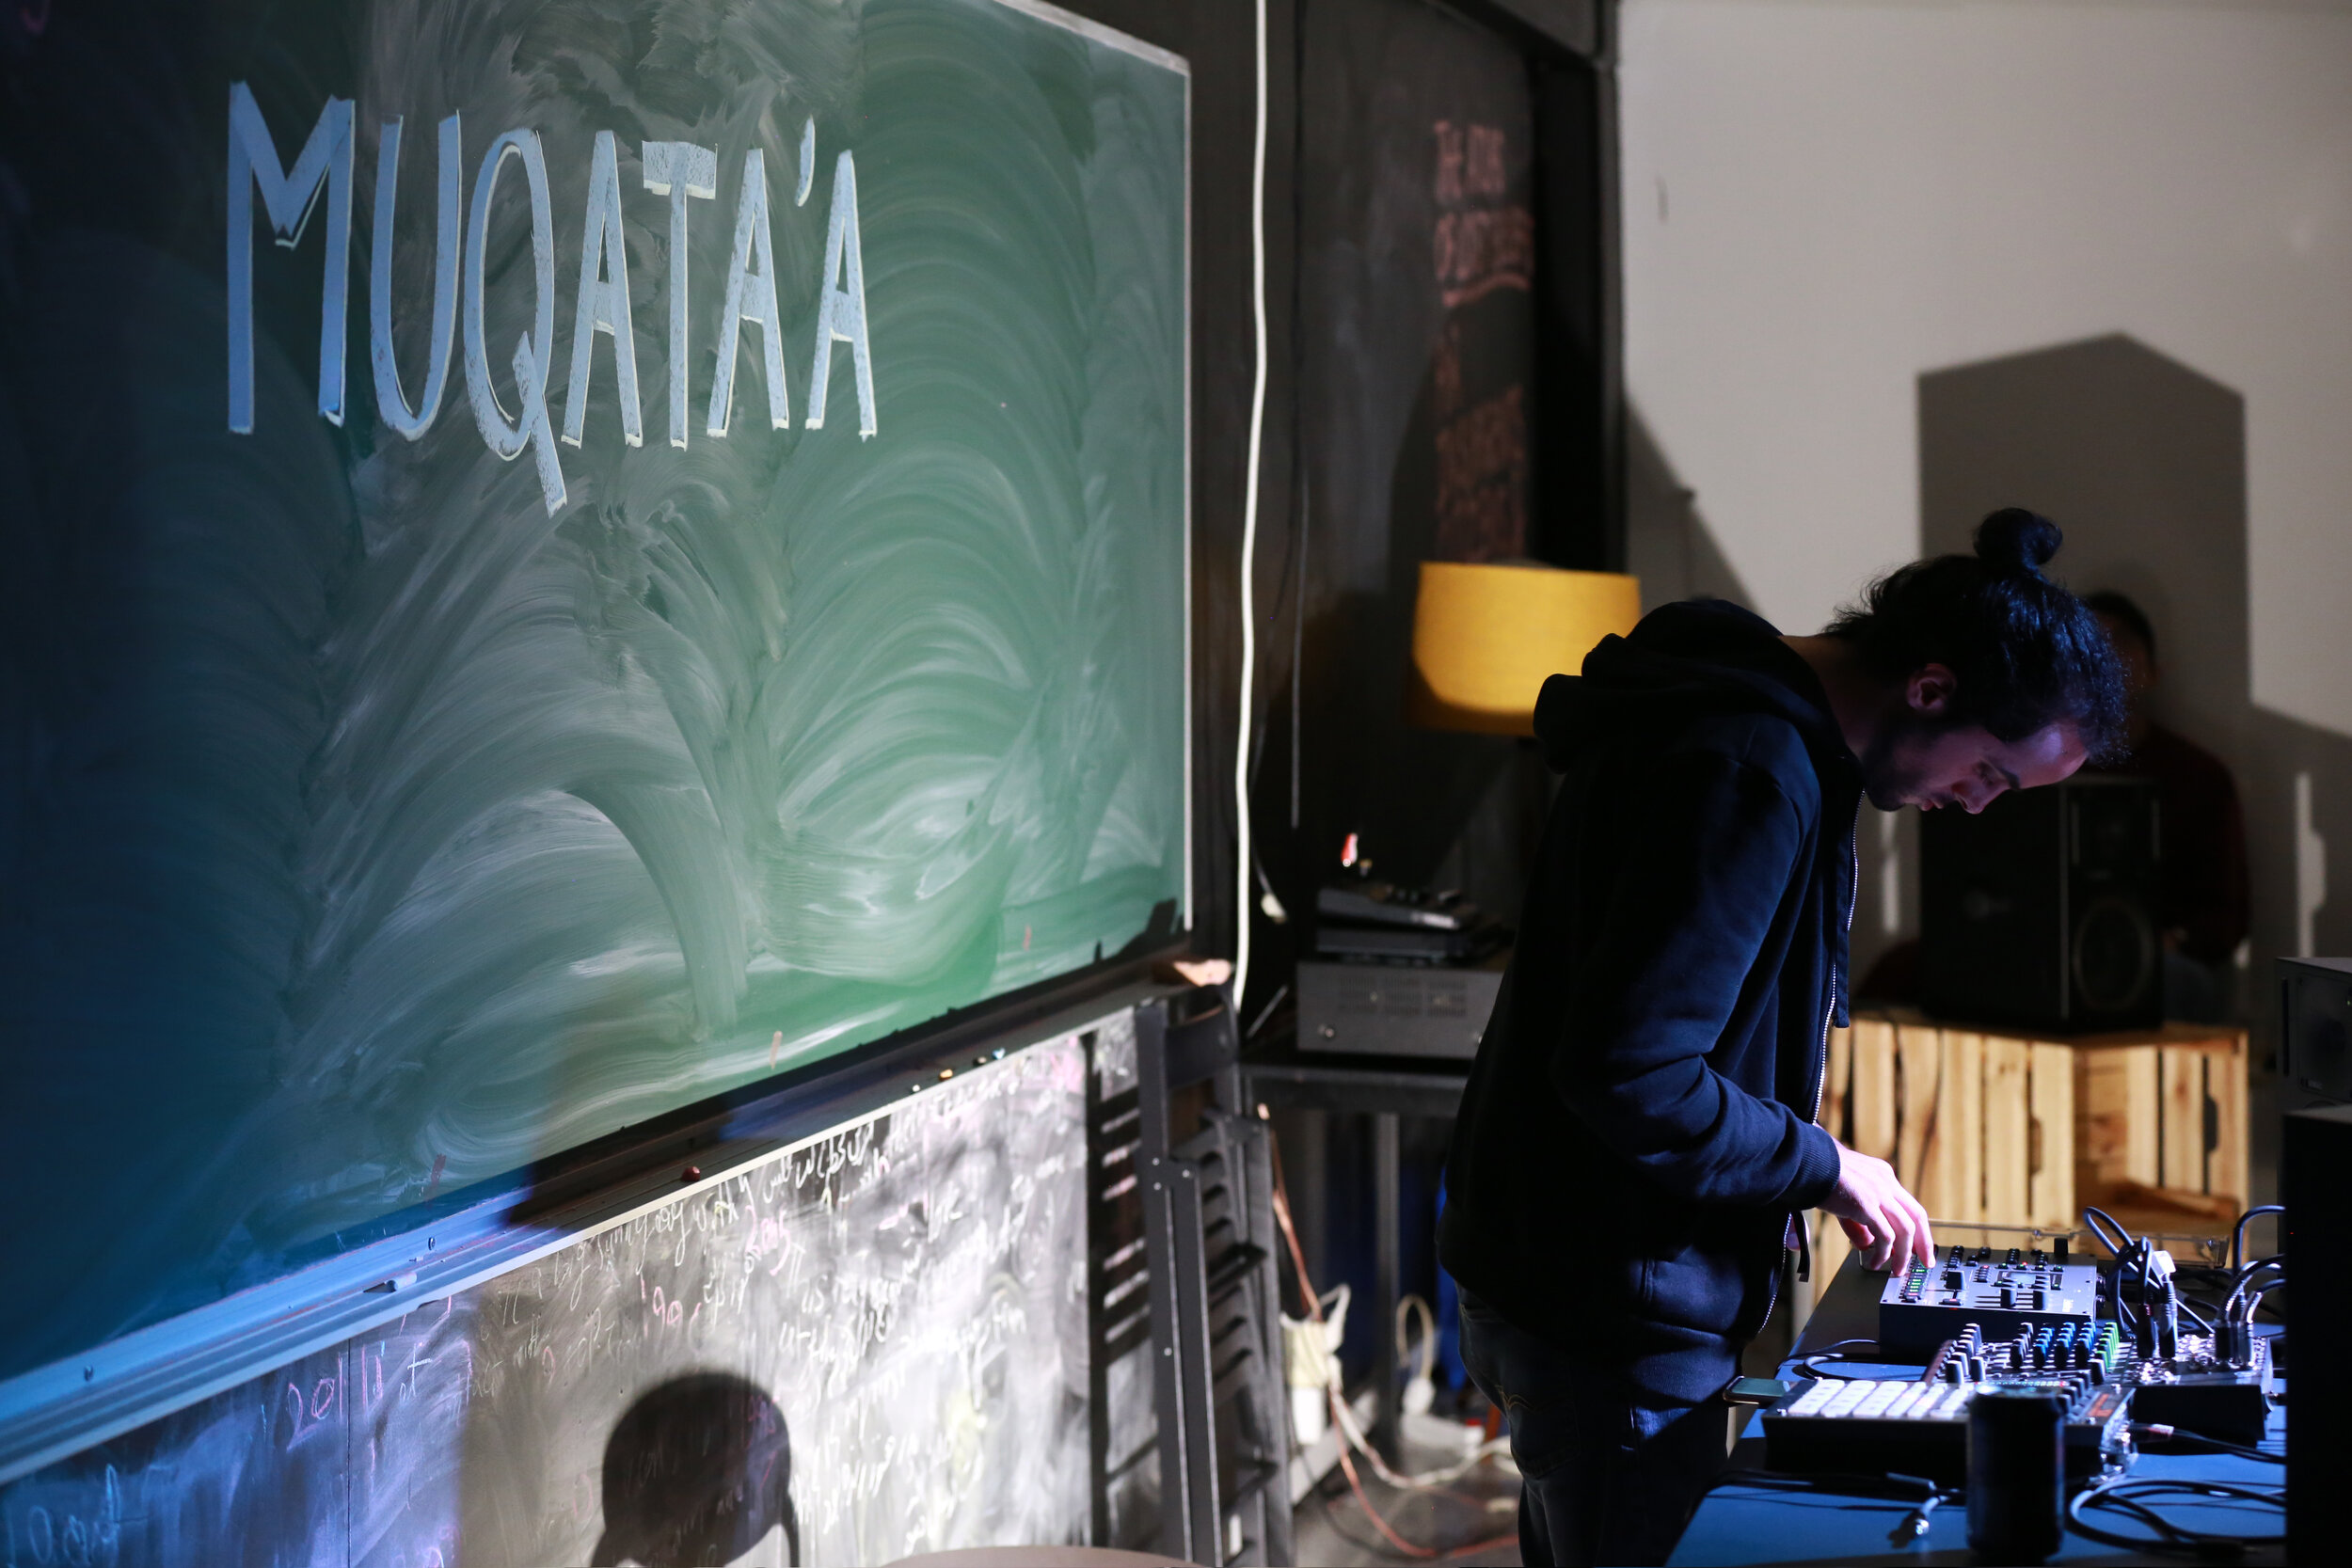 Museum of Impossible Forms_Mif Discourse Series-Muqata'a concert_photo by Aman Askerizad.JPG